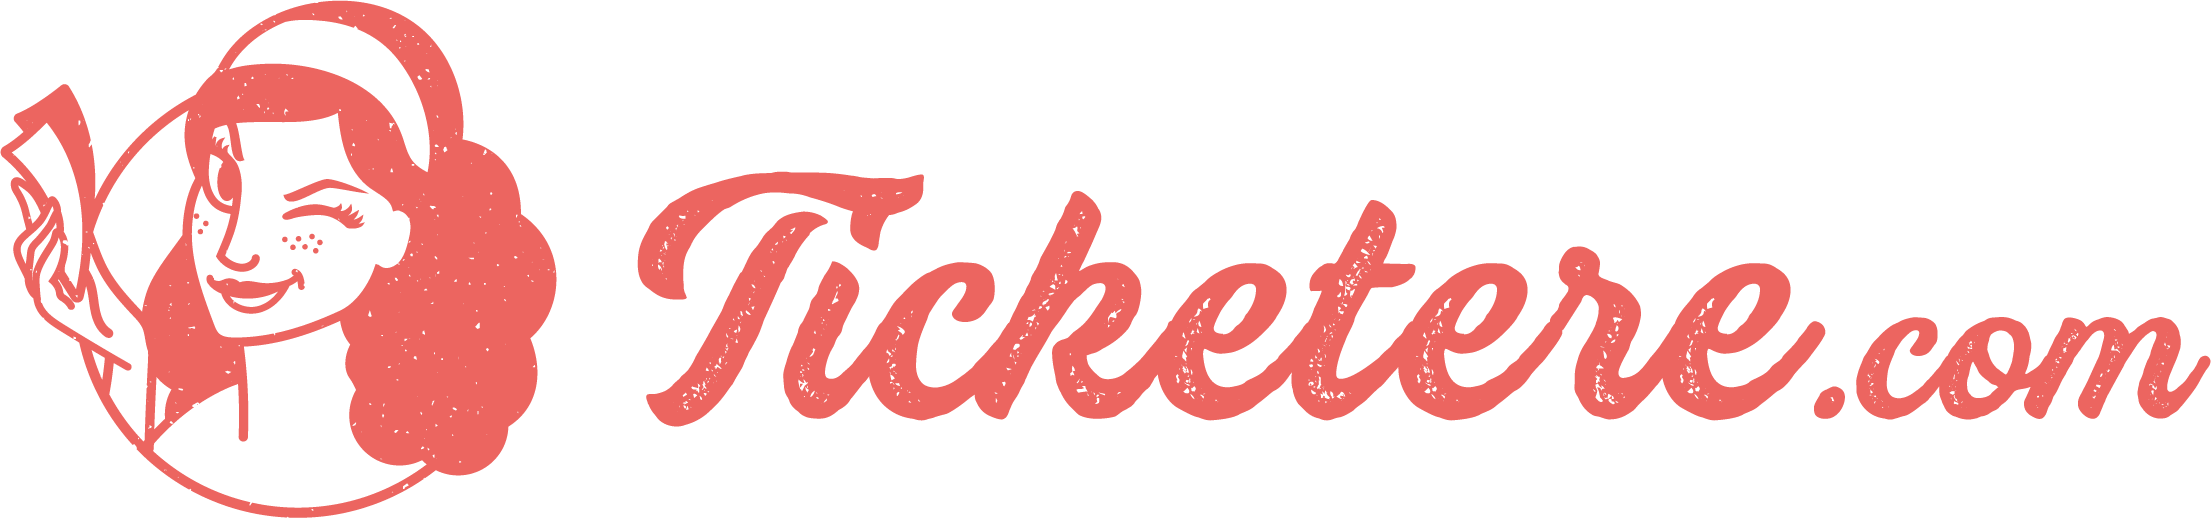 TickeTere